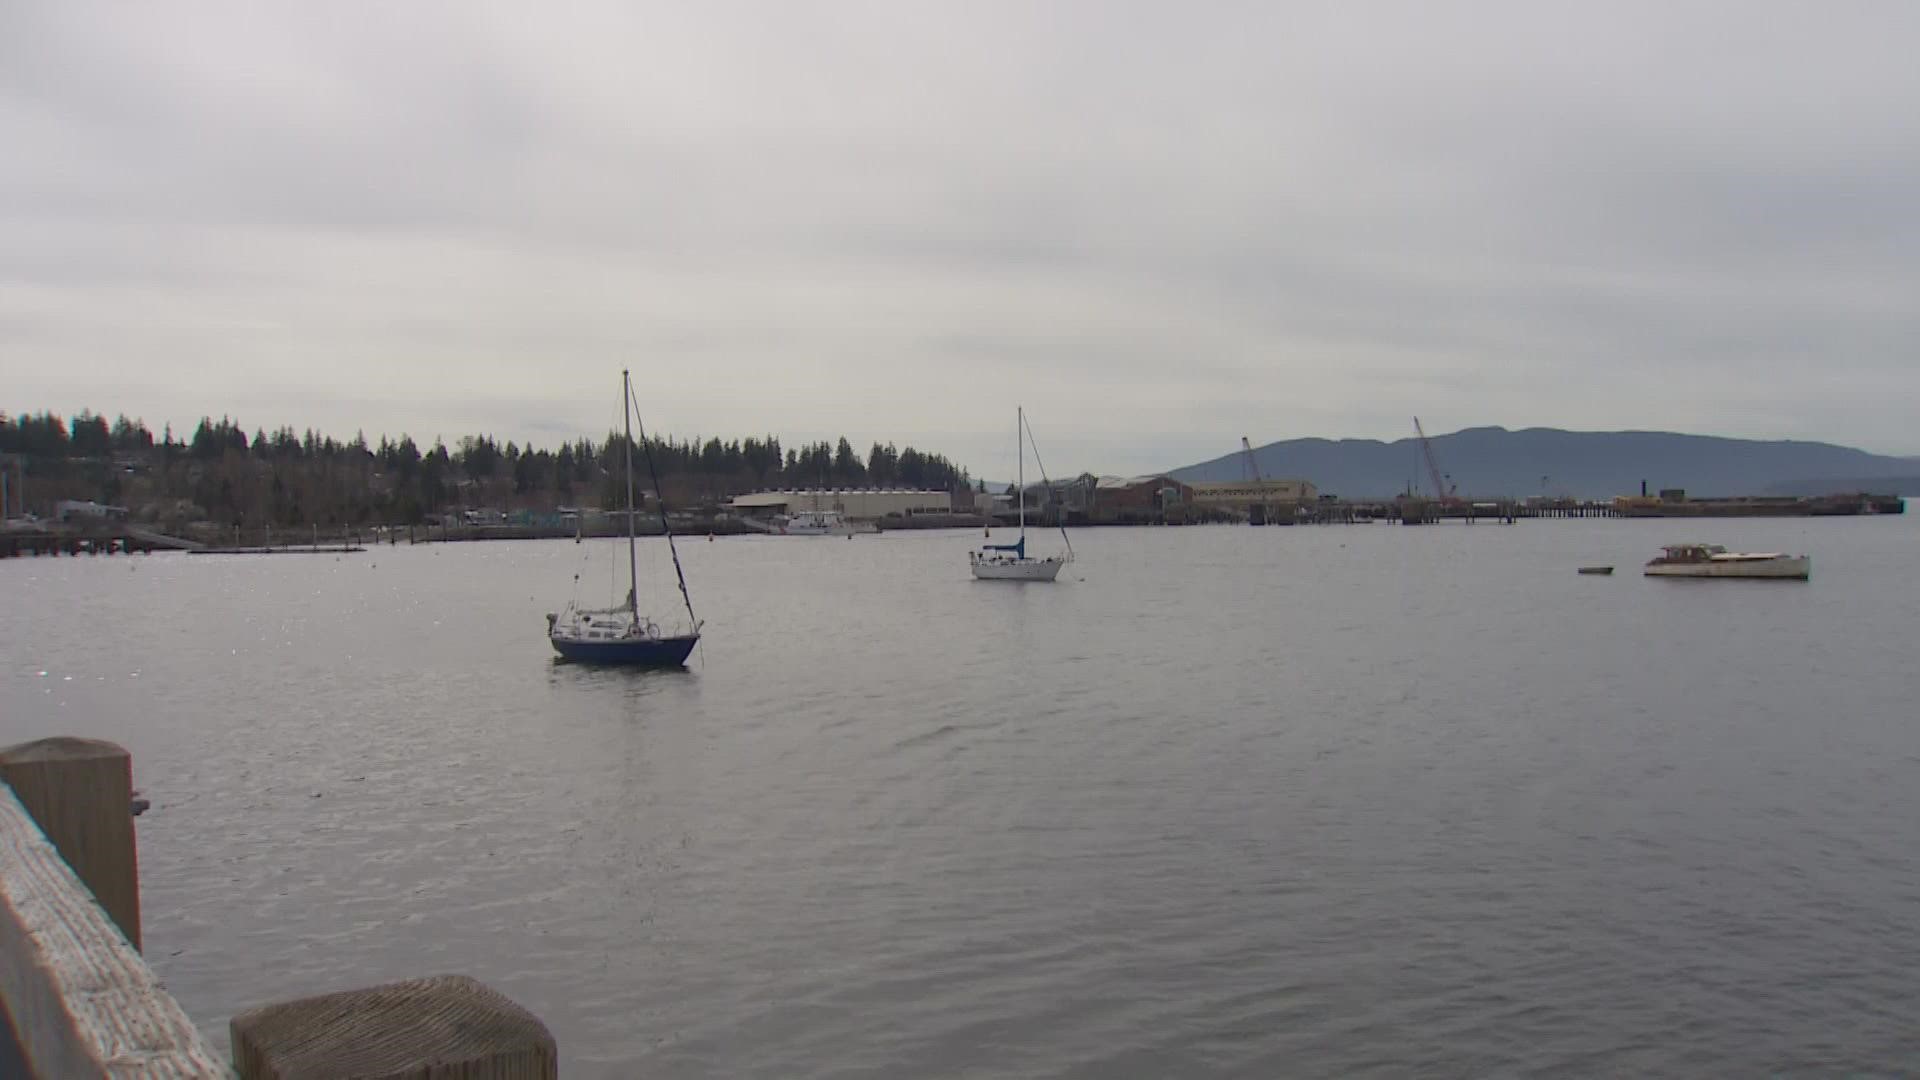 The Pacific Whale Watch Association confirmed multiple sightings of a humpback whale just 20 yards from shore in Bellingham Bay.